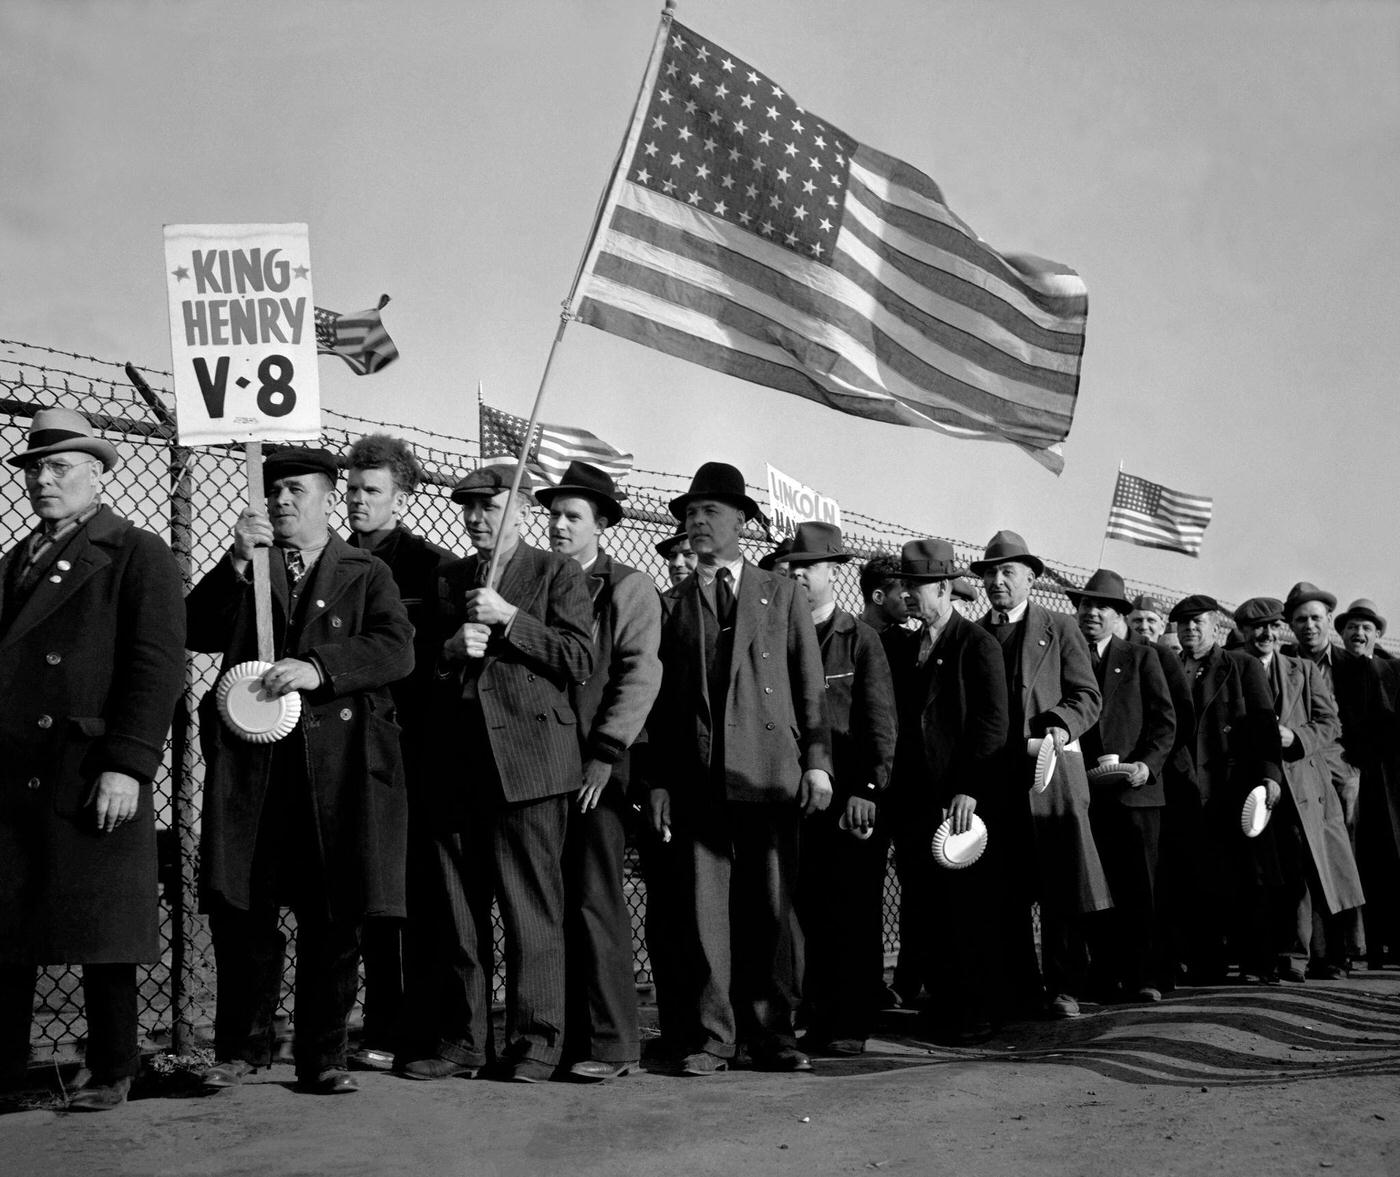 Workers from the Ford Motor Company hold American Flags near the River Rouge plant during the Detroit Ford Labor strike in Dearborn, Michigan, April 11, 1941.